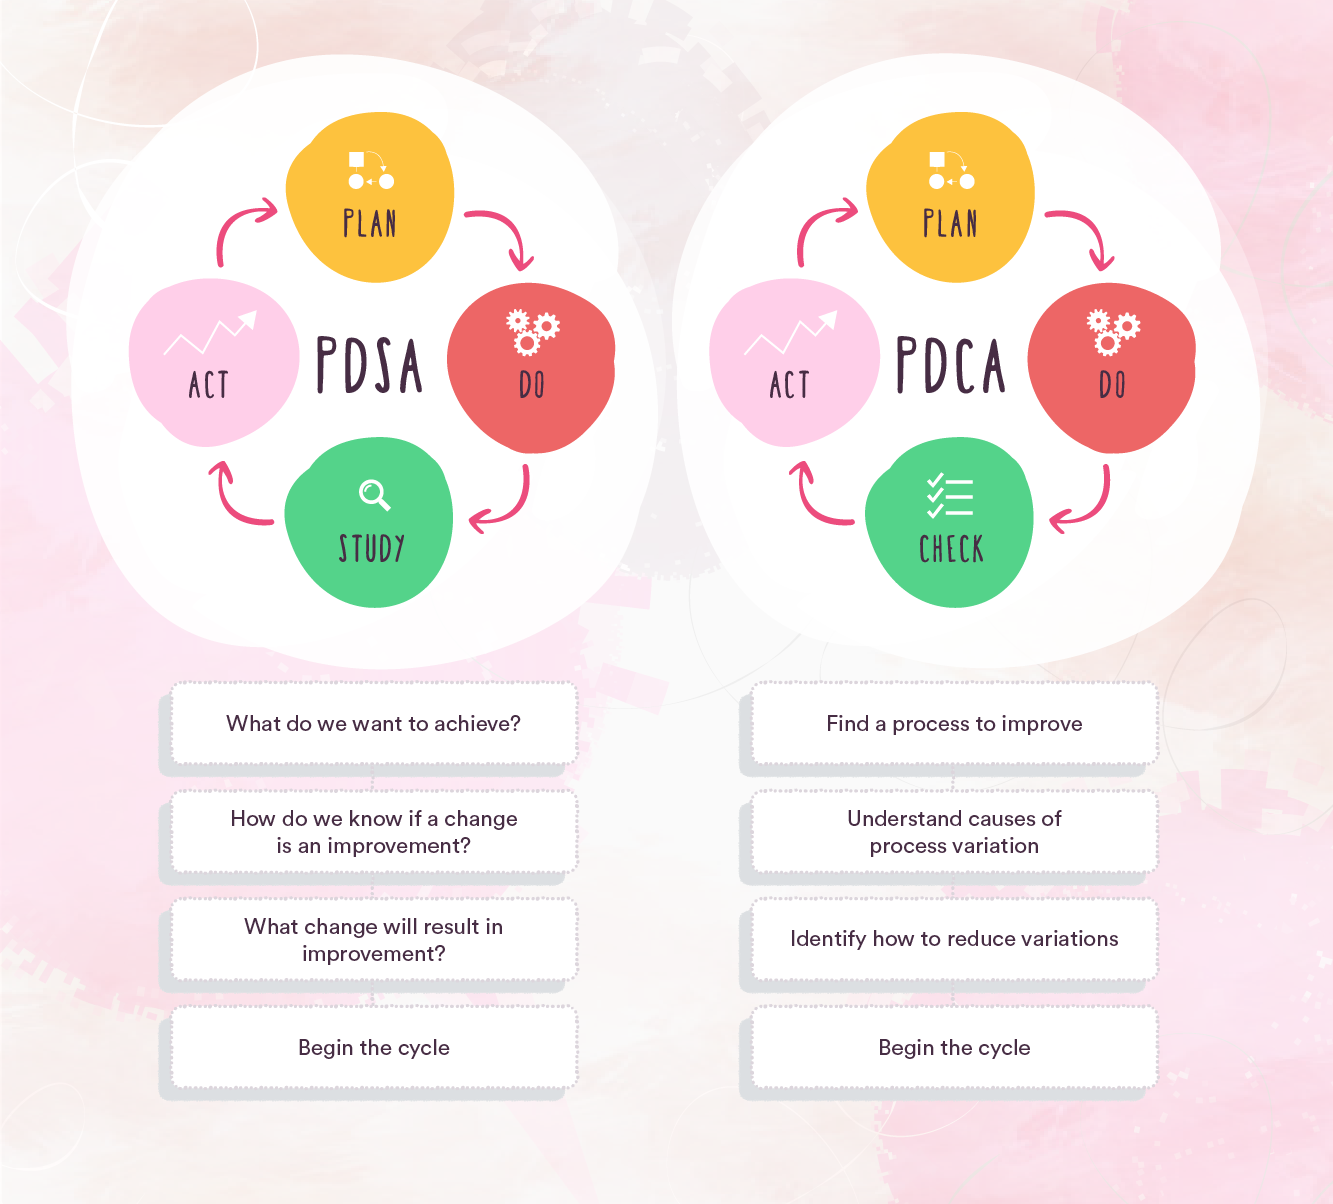 PDSA and PDCA cycles